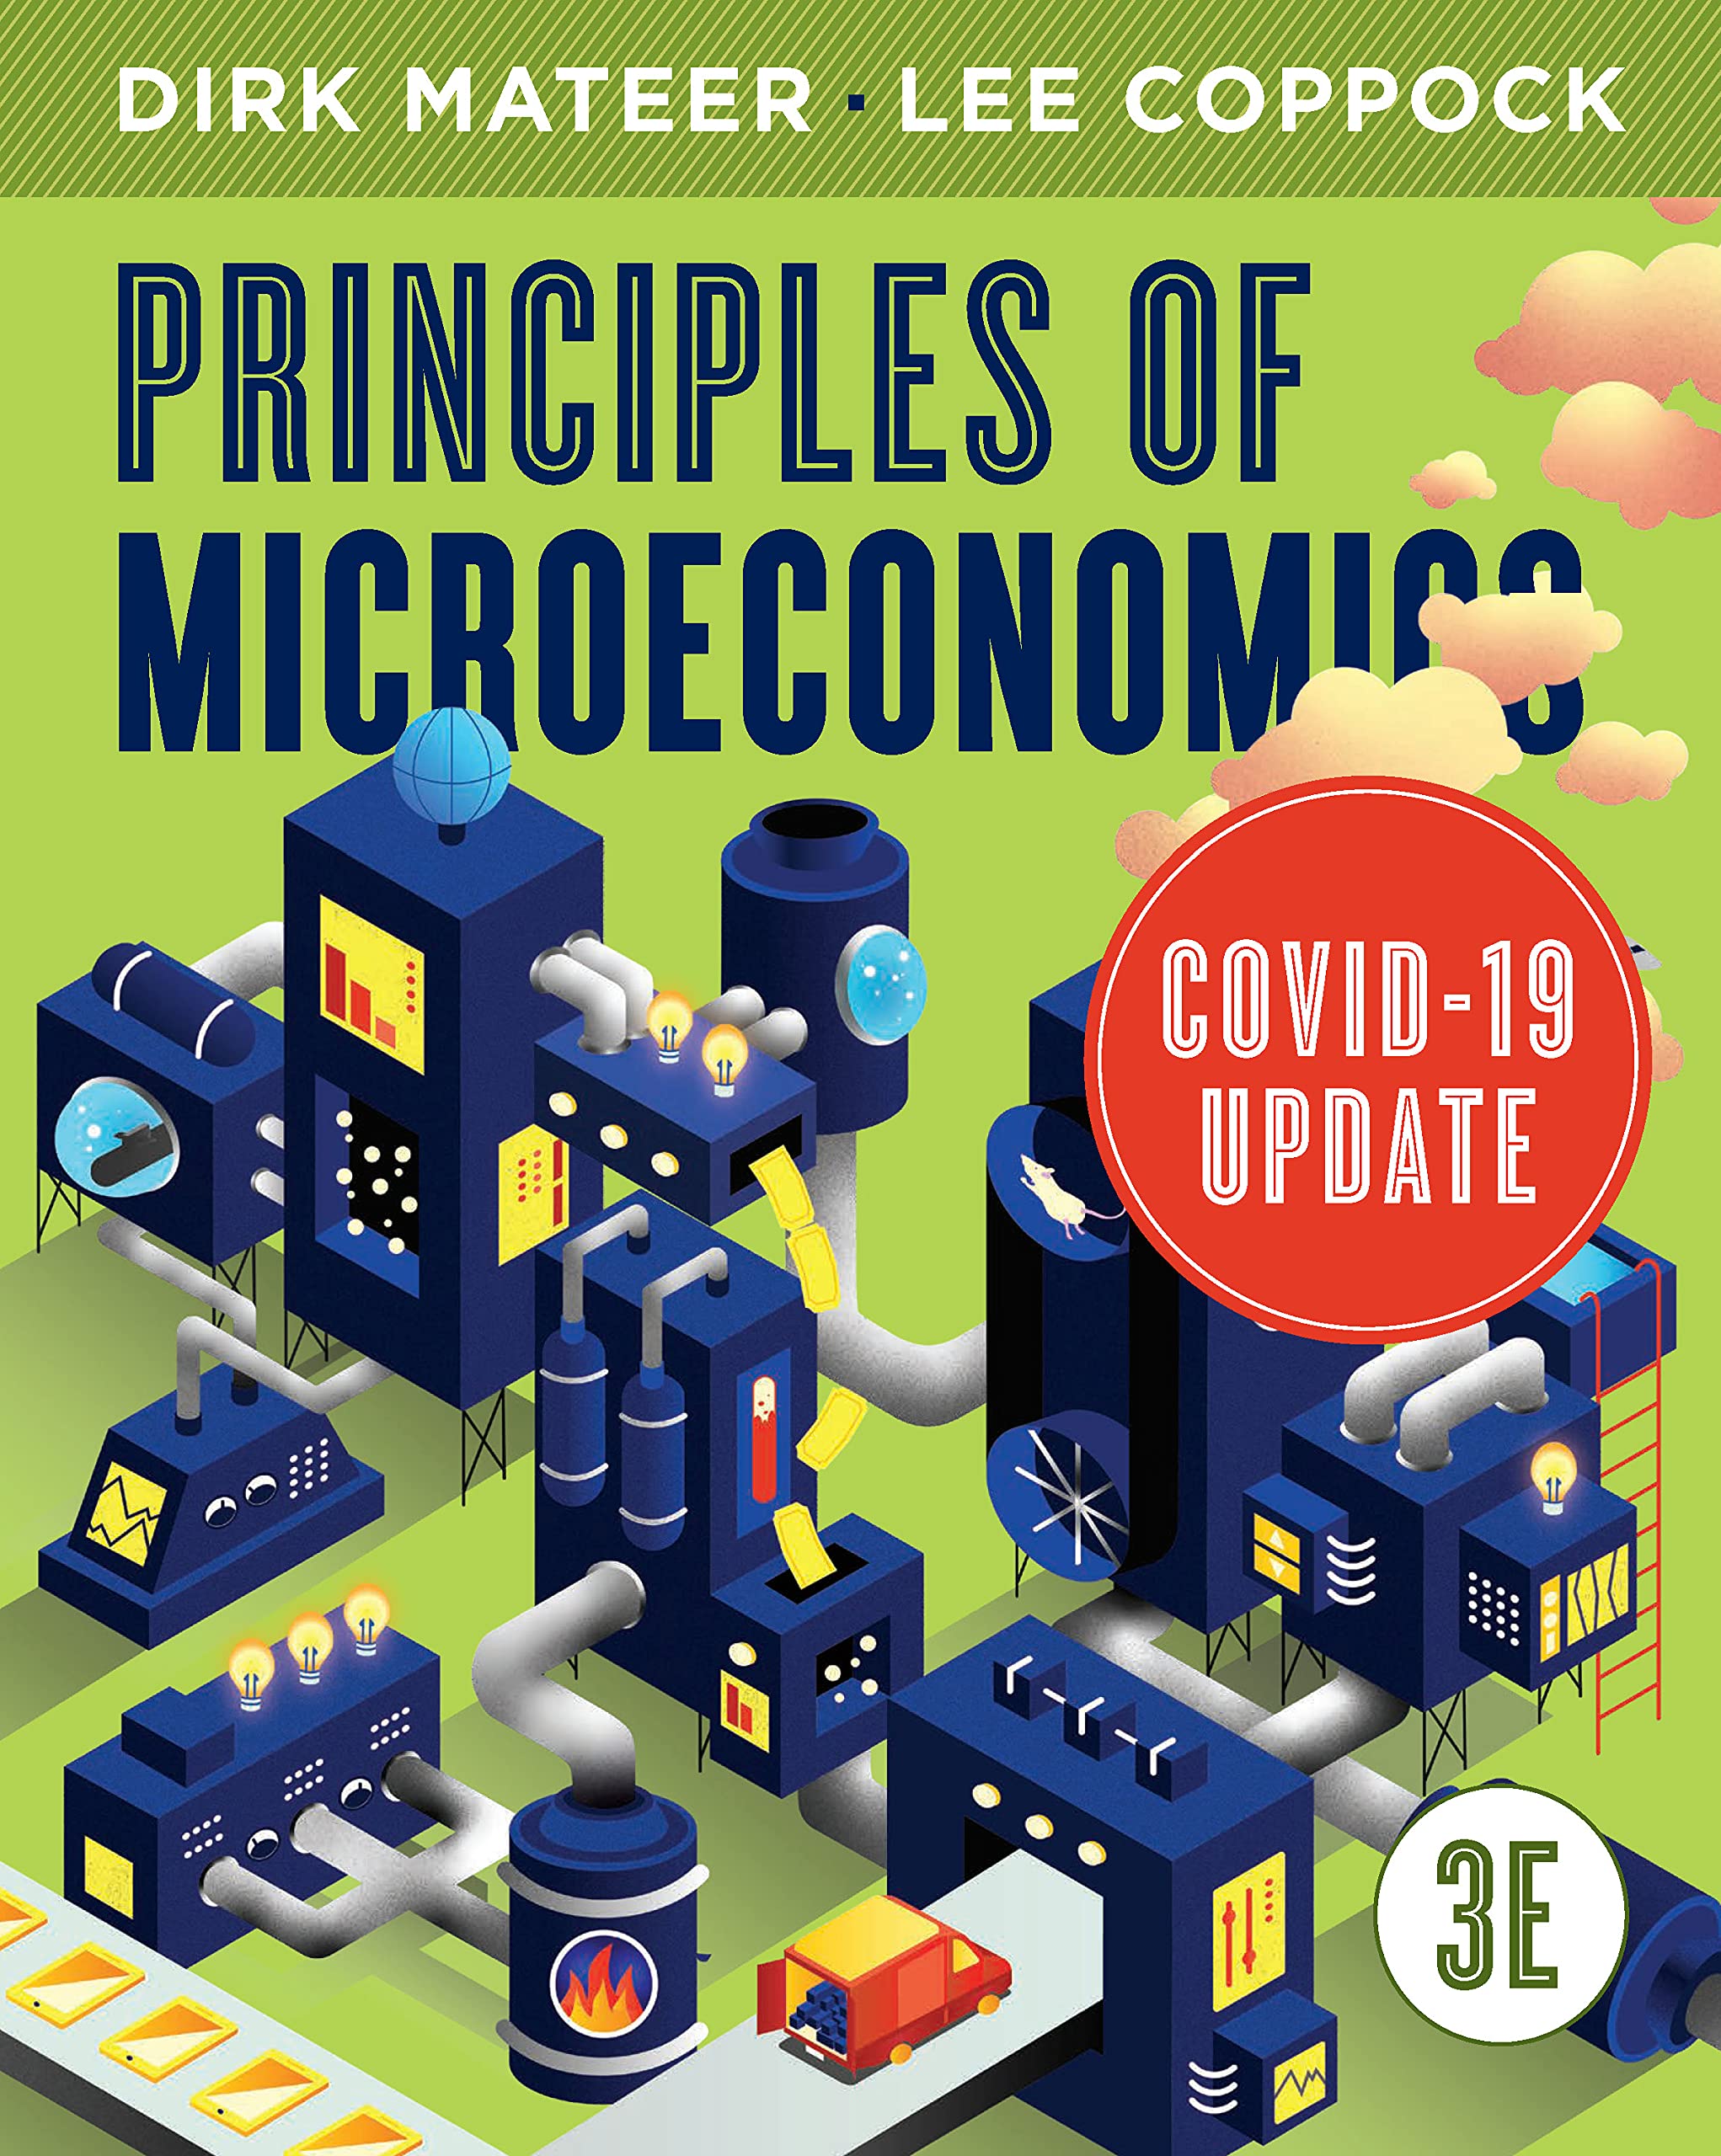 The cover of an economics textbook, with blue computer-like structures over a bright green background. Text reads "principles of microeconomics." A red circle on the cover has the words "COVID-19 Update" inside of it